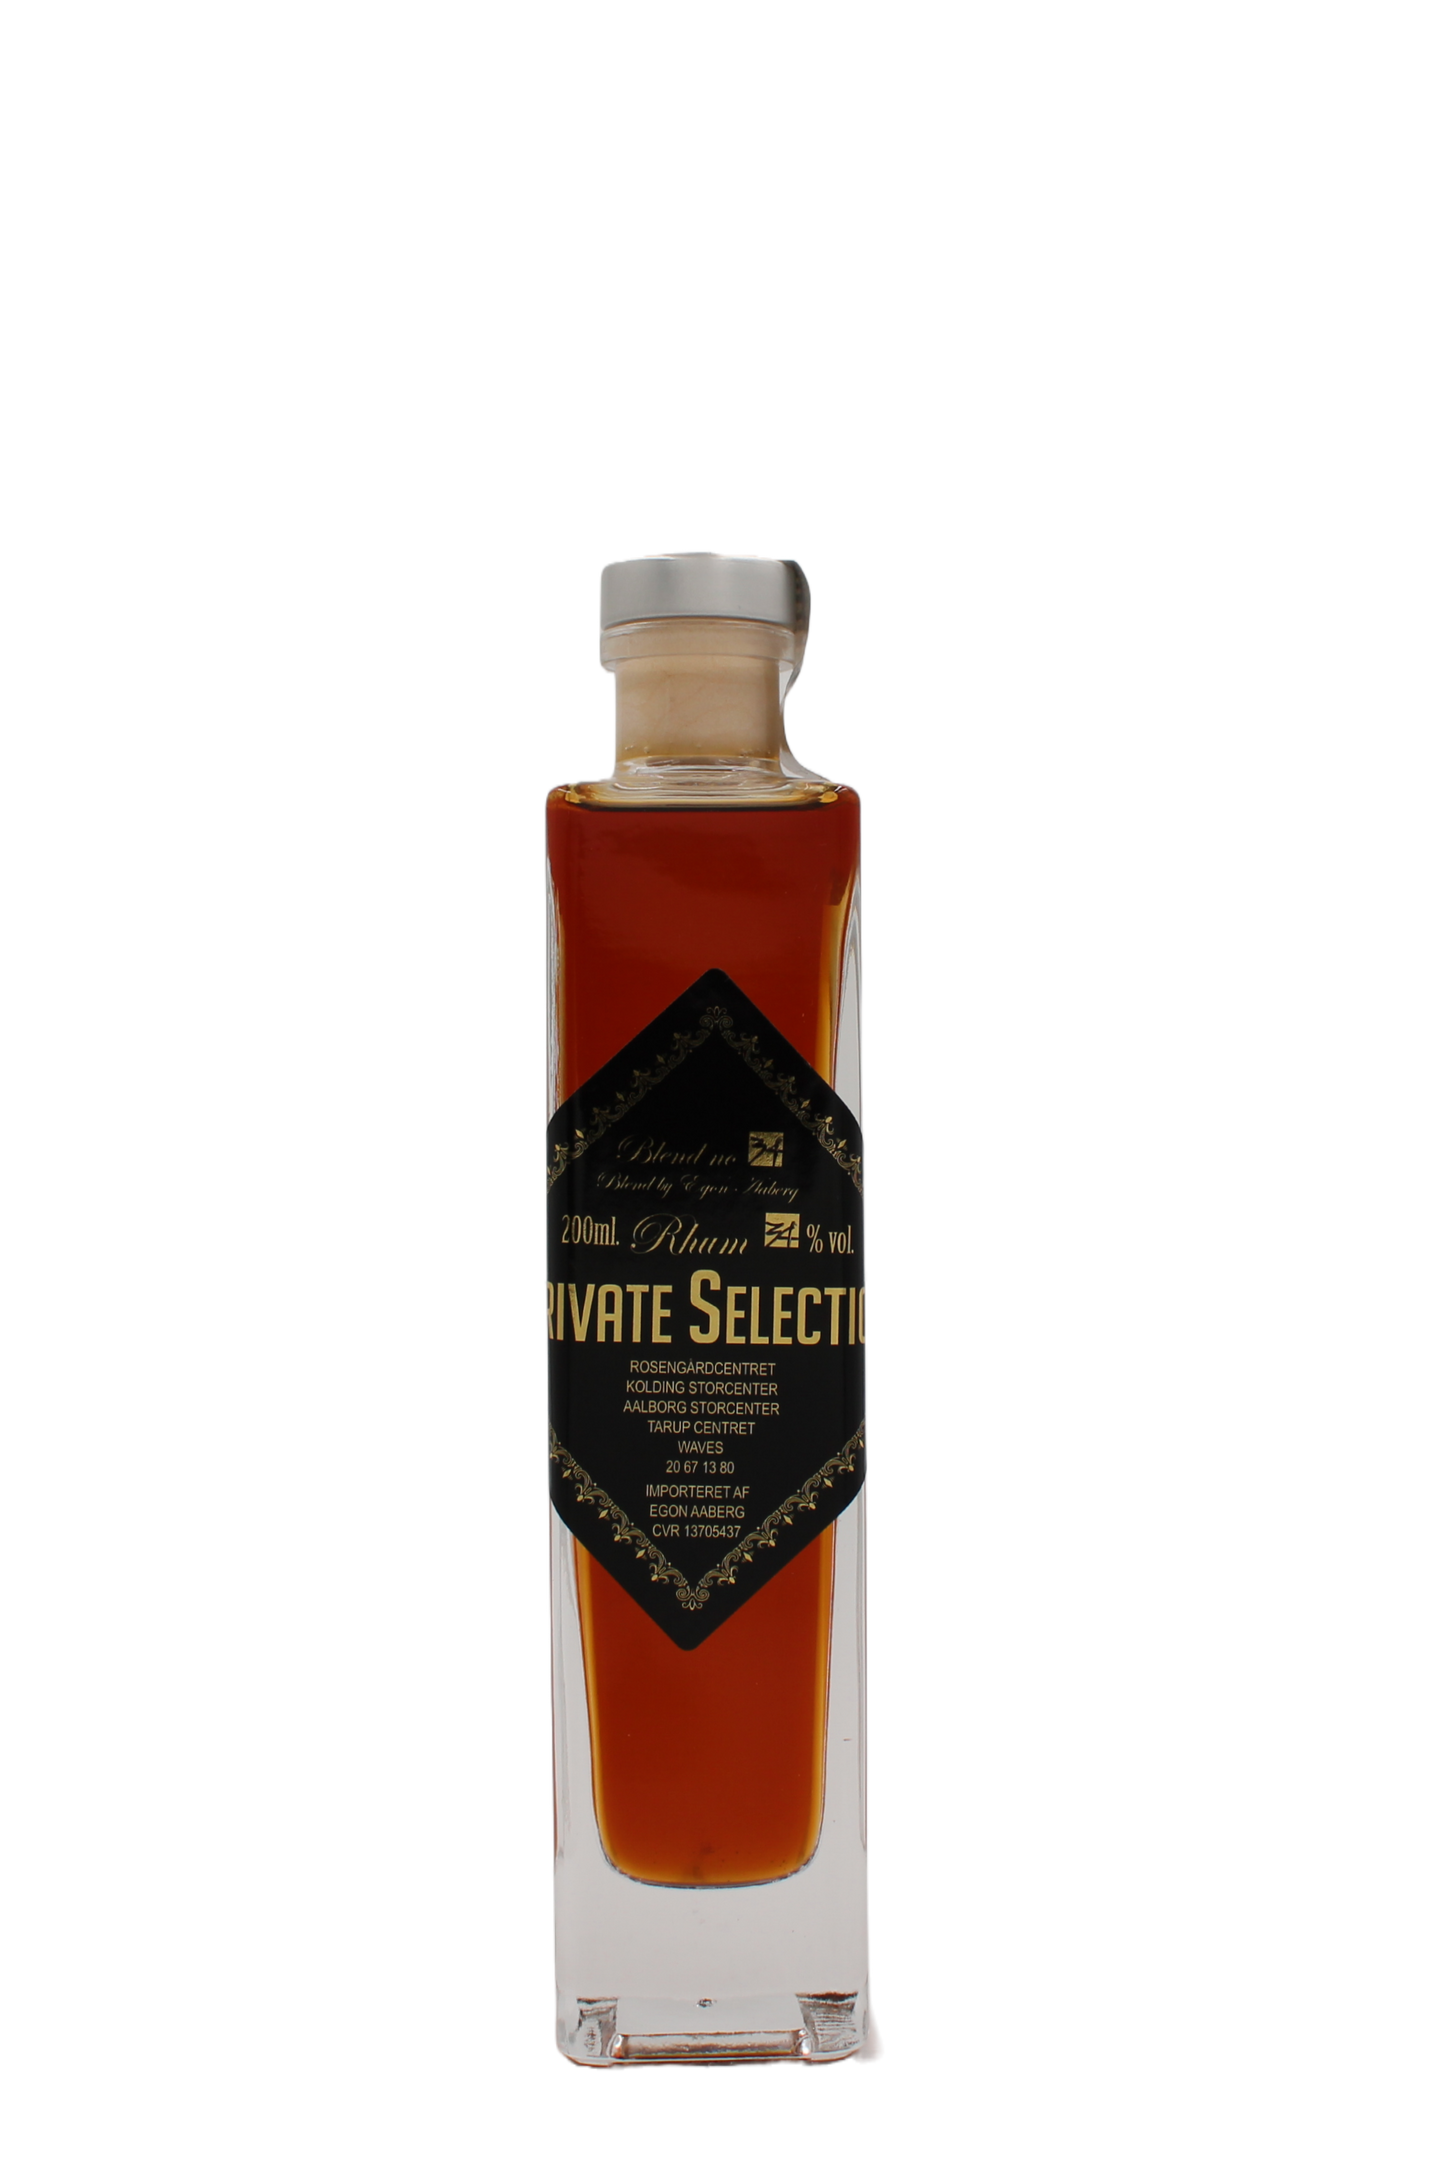 Private Selection - Blend no. 34 200ml